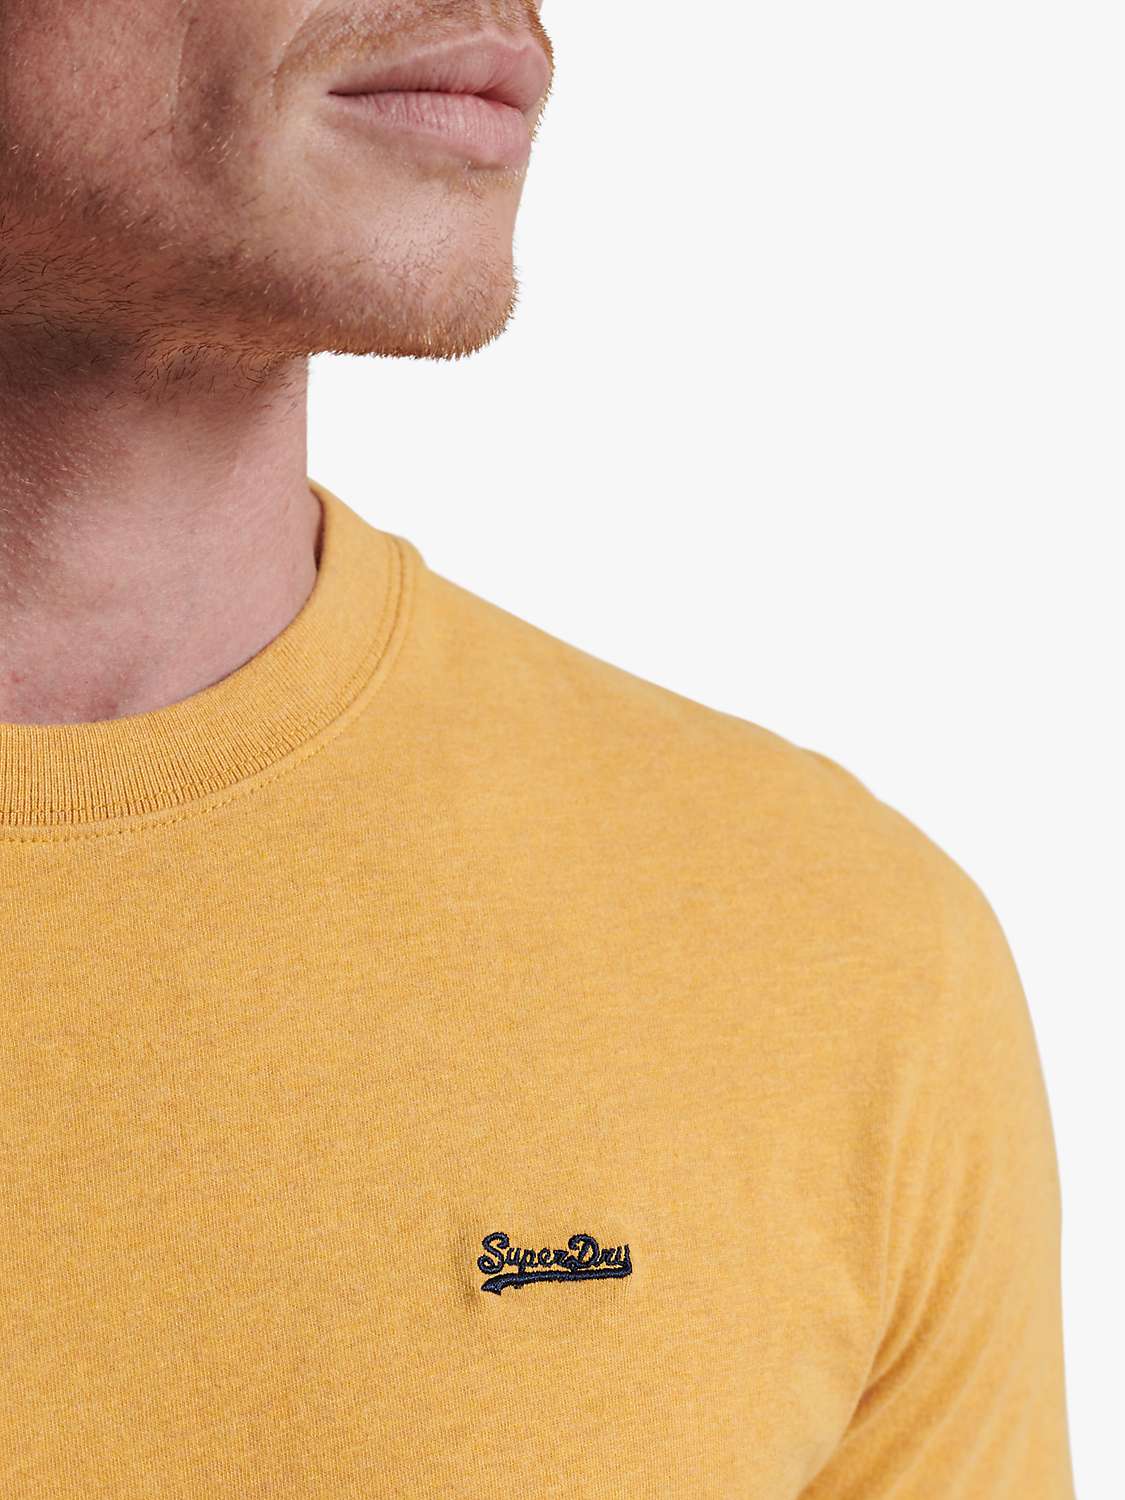 Buy Superdry Organic Cotton Vintage Embroidered T-Shirt Online at johnlewis.com